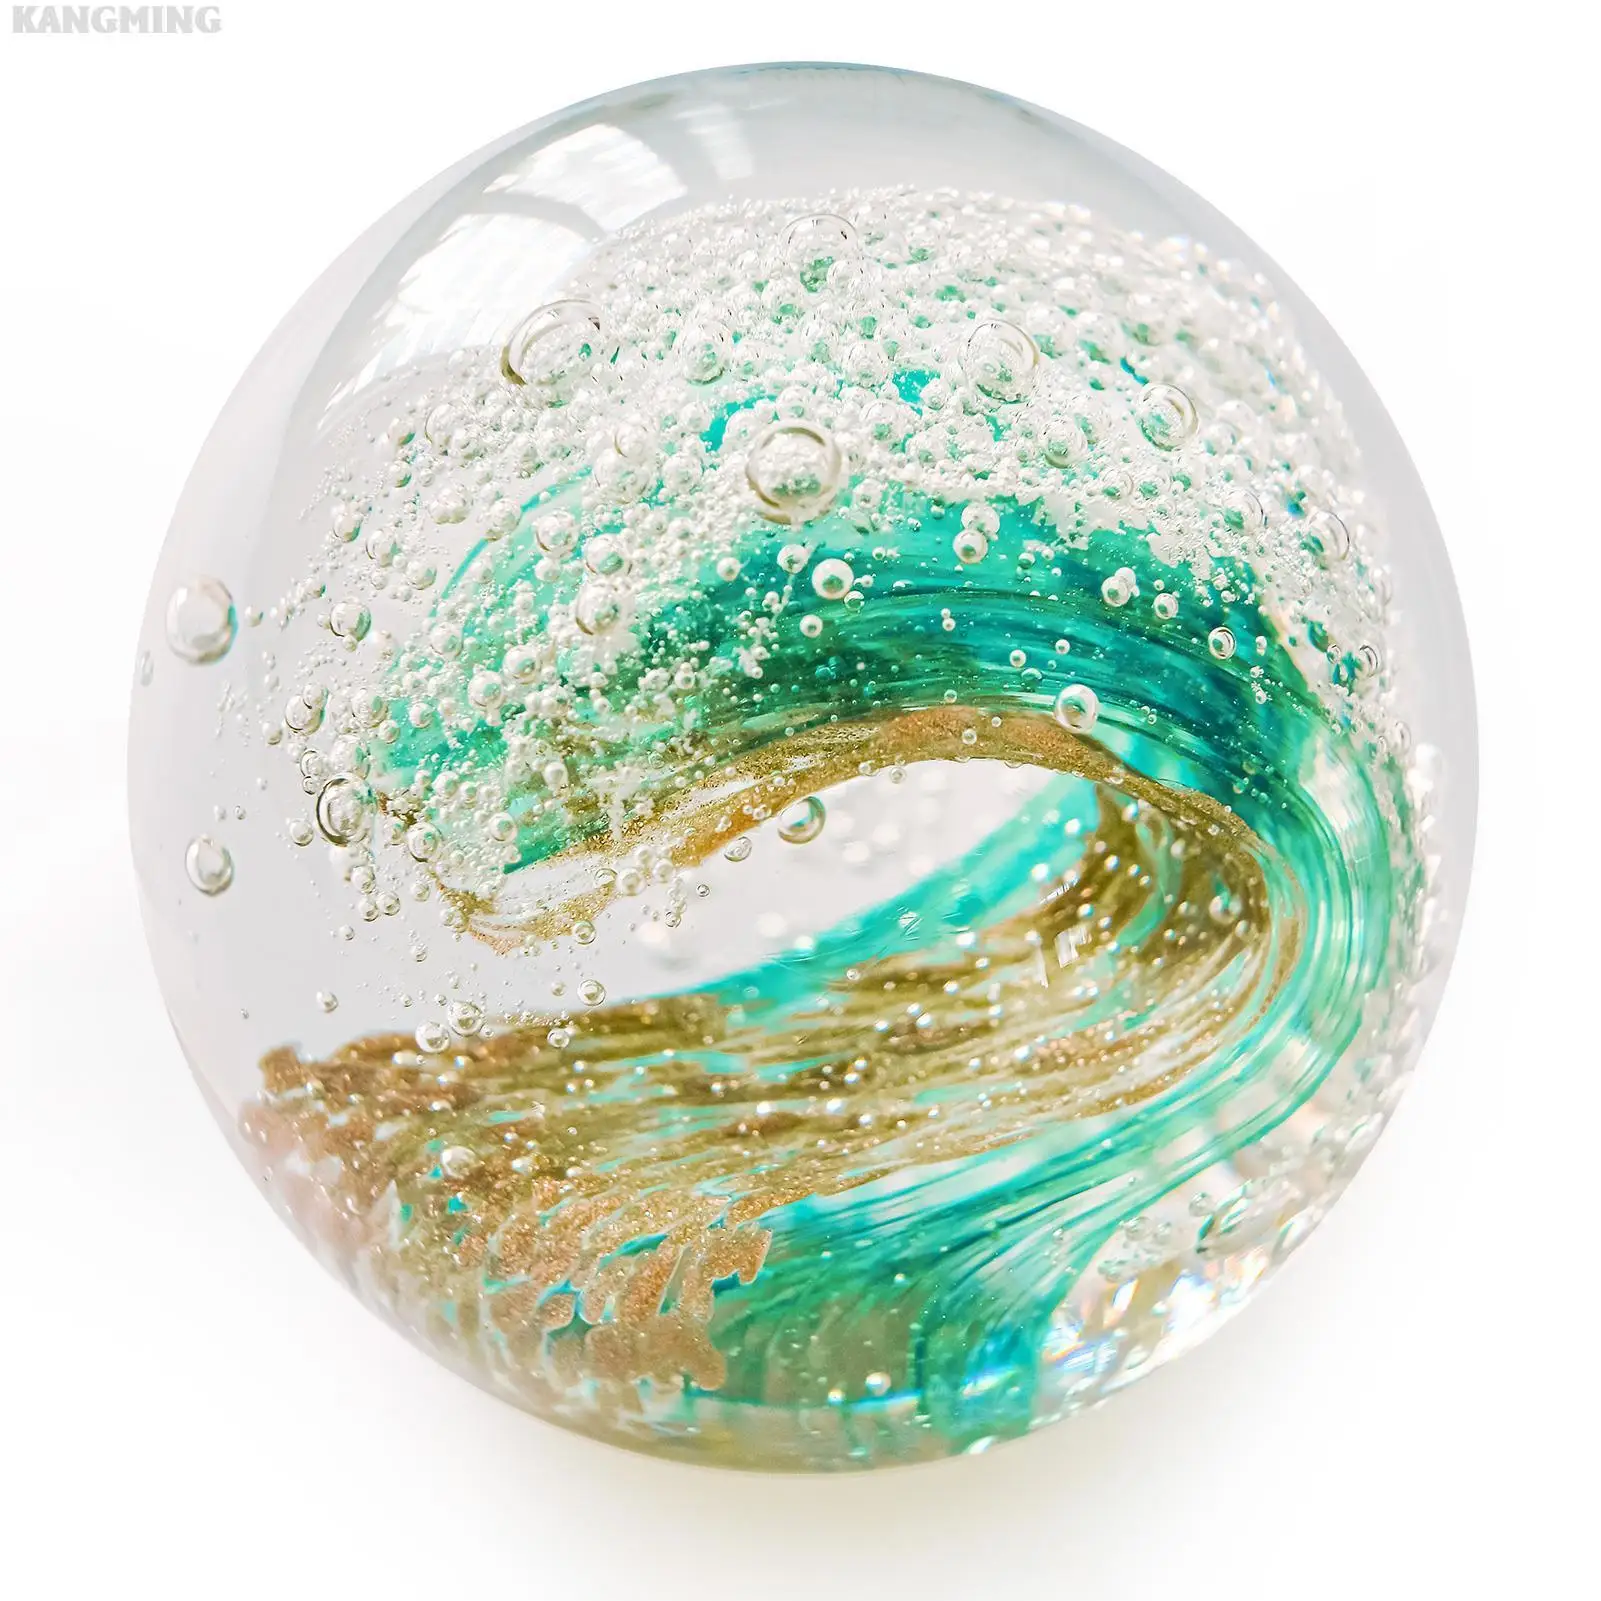 

KANGMING Hand Blown Glass Figurines Ball Ocean Waves,Office Paperweight Glass for Desk,Home Decor Collectible,Aquarium Decor